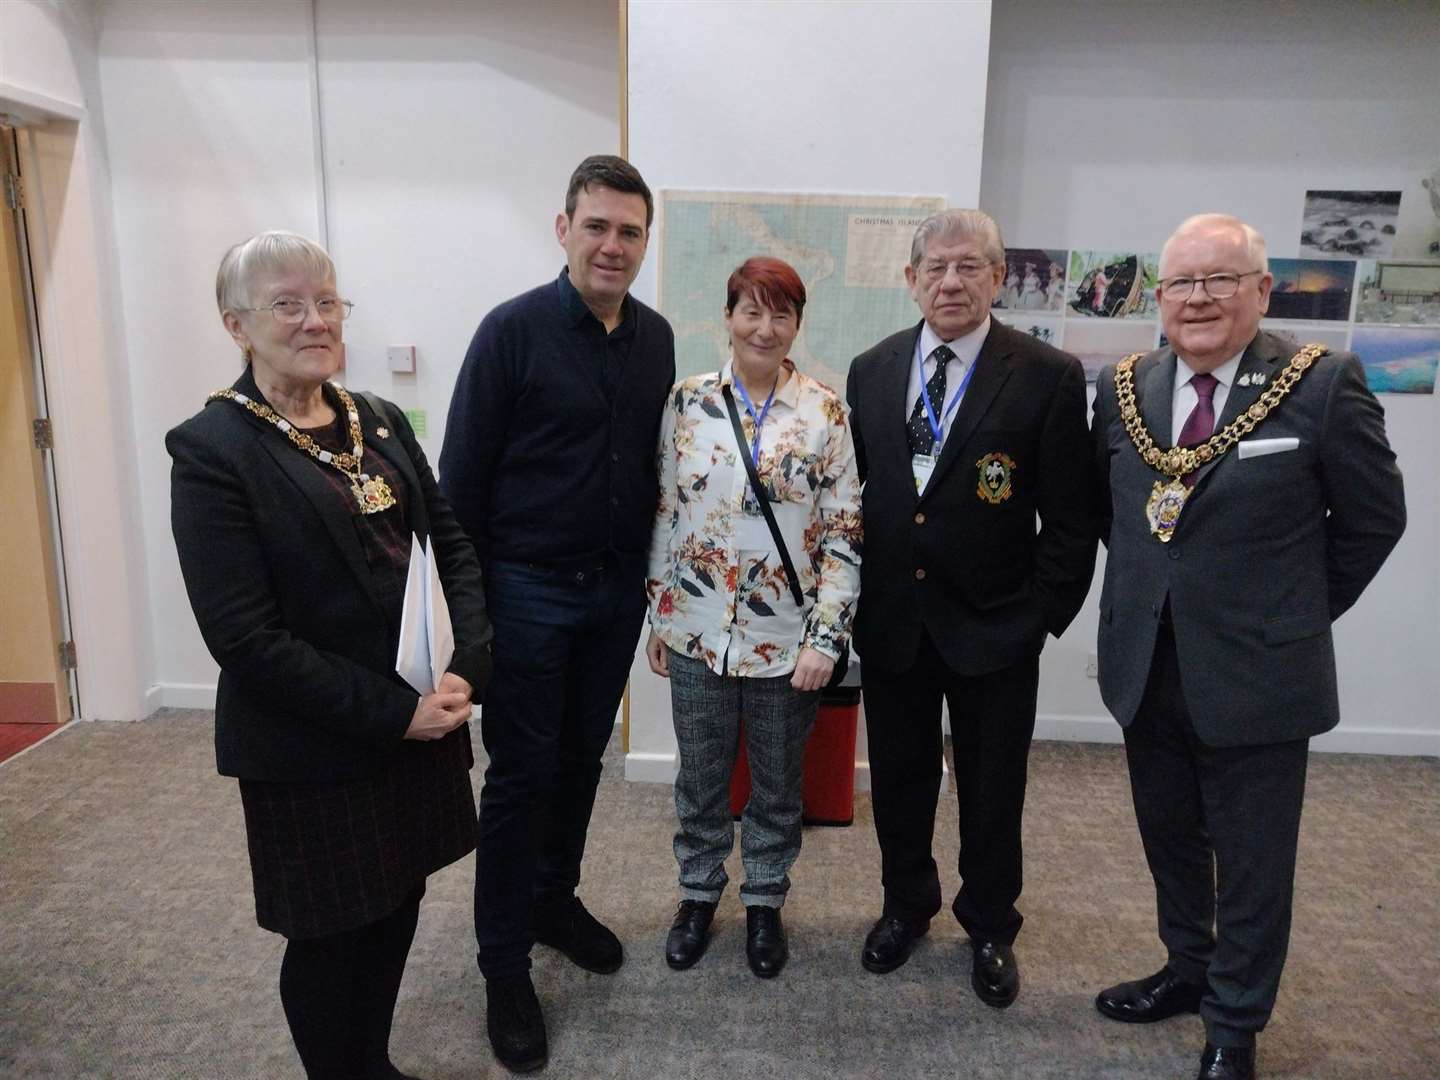 From left, the Lady Mayoress of Manchester Carole Judge, the Metro Mayor Andy Burnham, Anne Quinlan, Terry Quinlan and the Lord Mayor of Manchester Tommy Judge